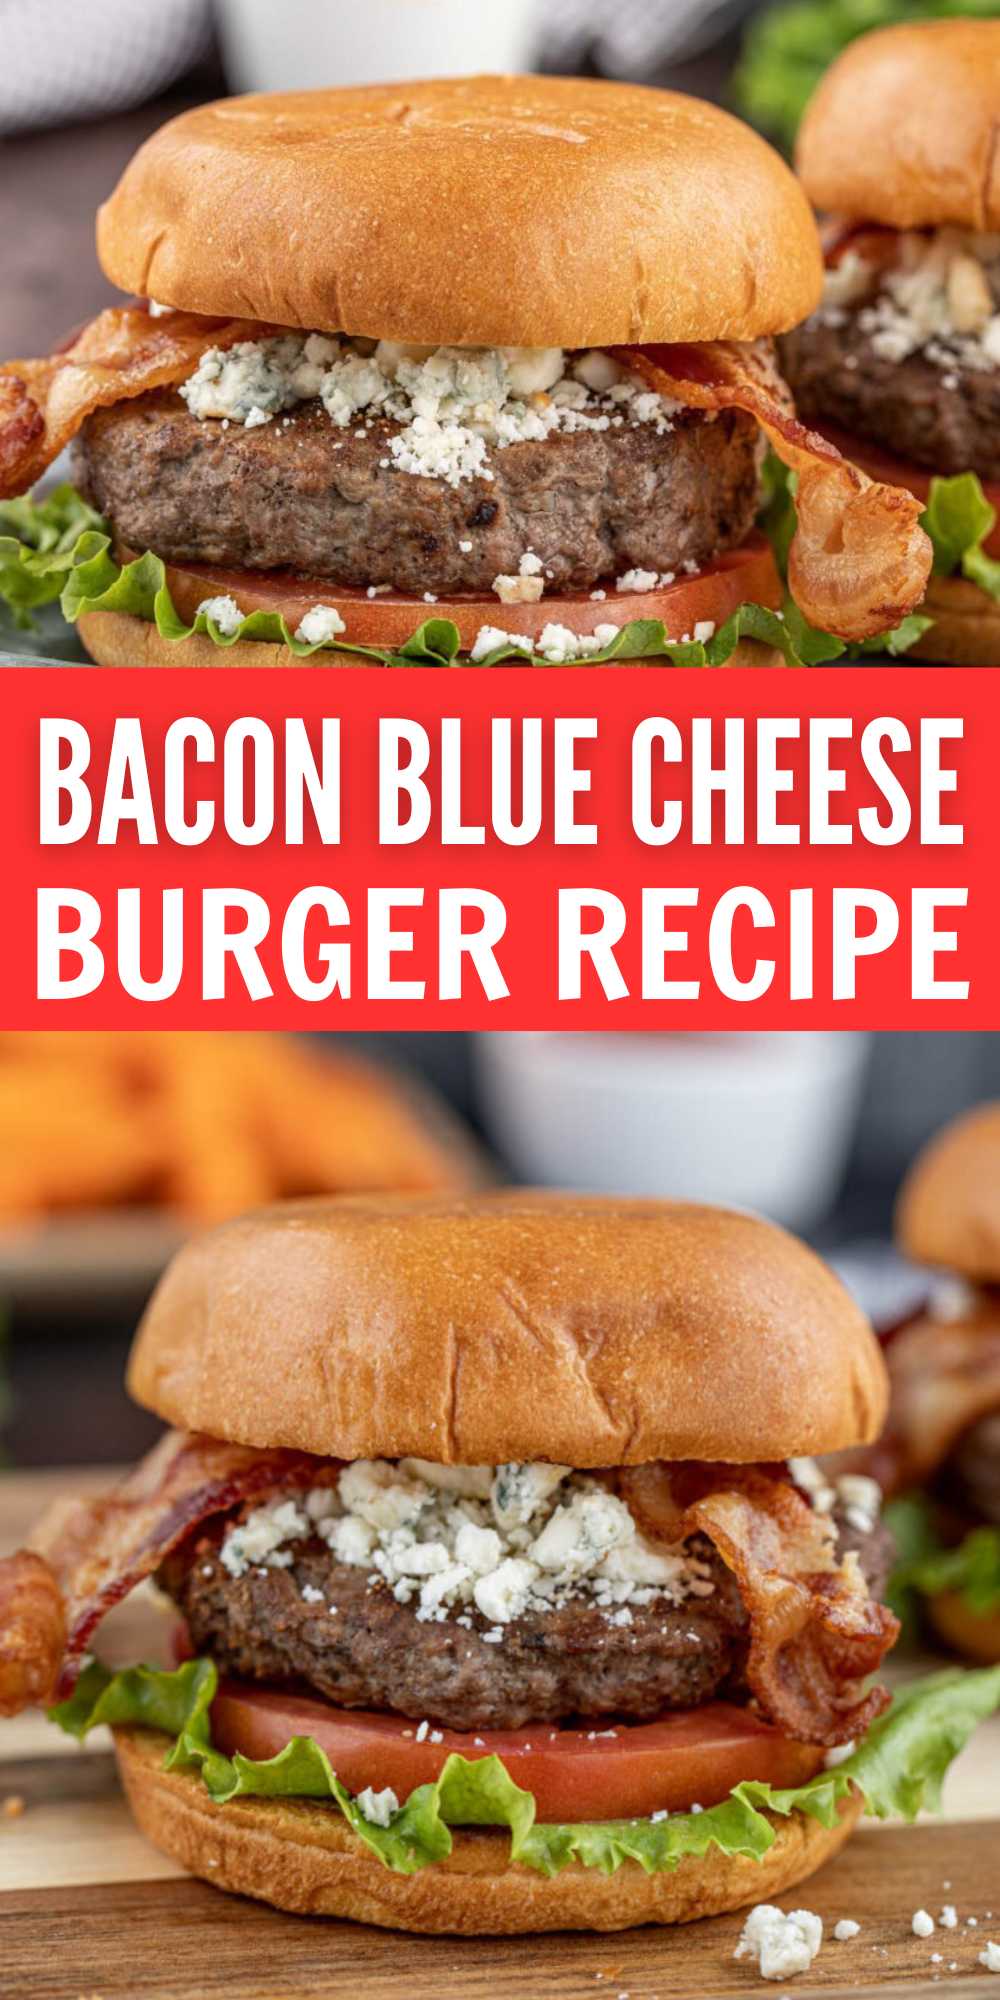 Bacon Blue Cheese Burger is the ultimate recipe. Juicy burger patties between brioche buns and topped with blue cheese and bacon.  This recipe takes plain burgers to the next level with so many tasty ingredients. #eatingonadime #baconbluecheeseburger #bluecheeseburger